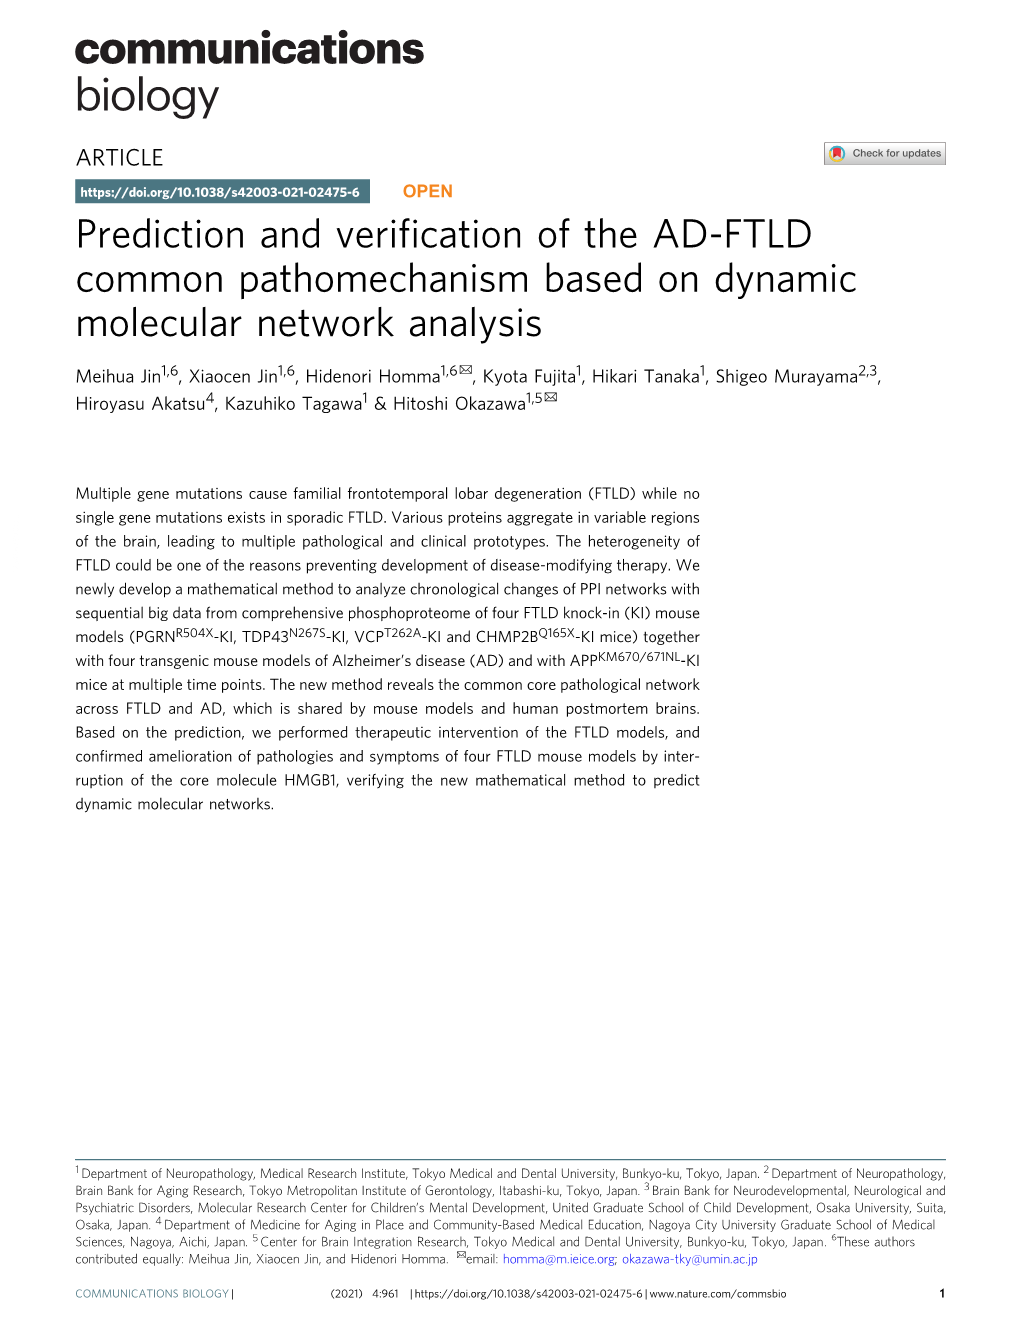 Prediction and Verification of the AD-FTLD Common Pathomechanism Based on Dynamic Molecular Network Analysis